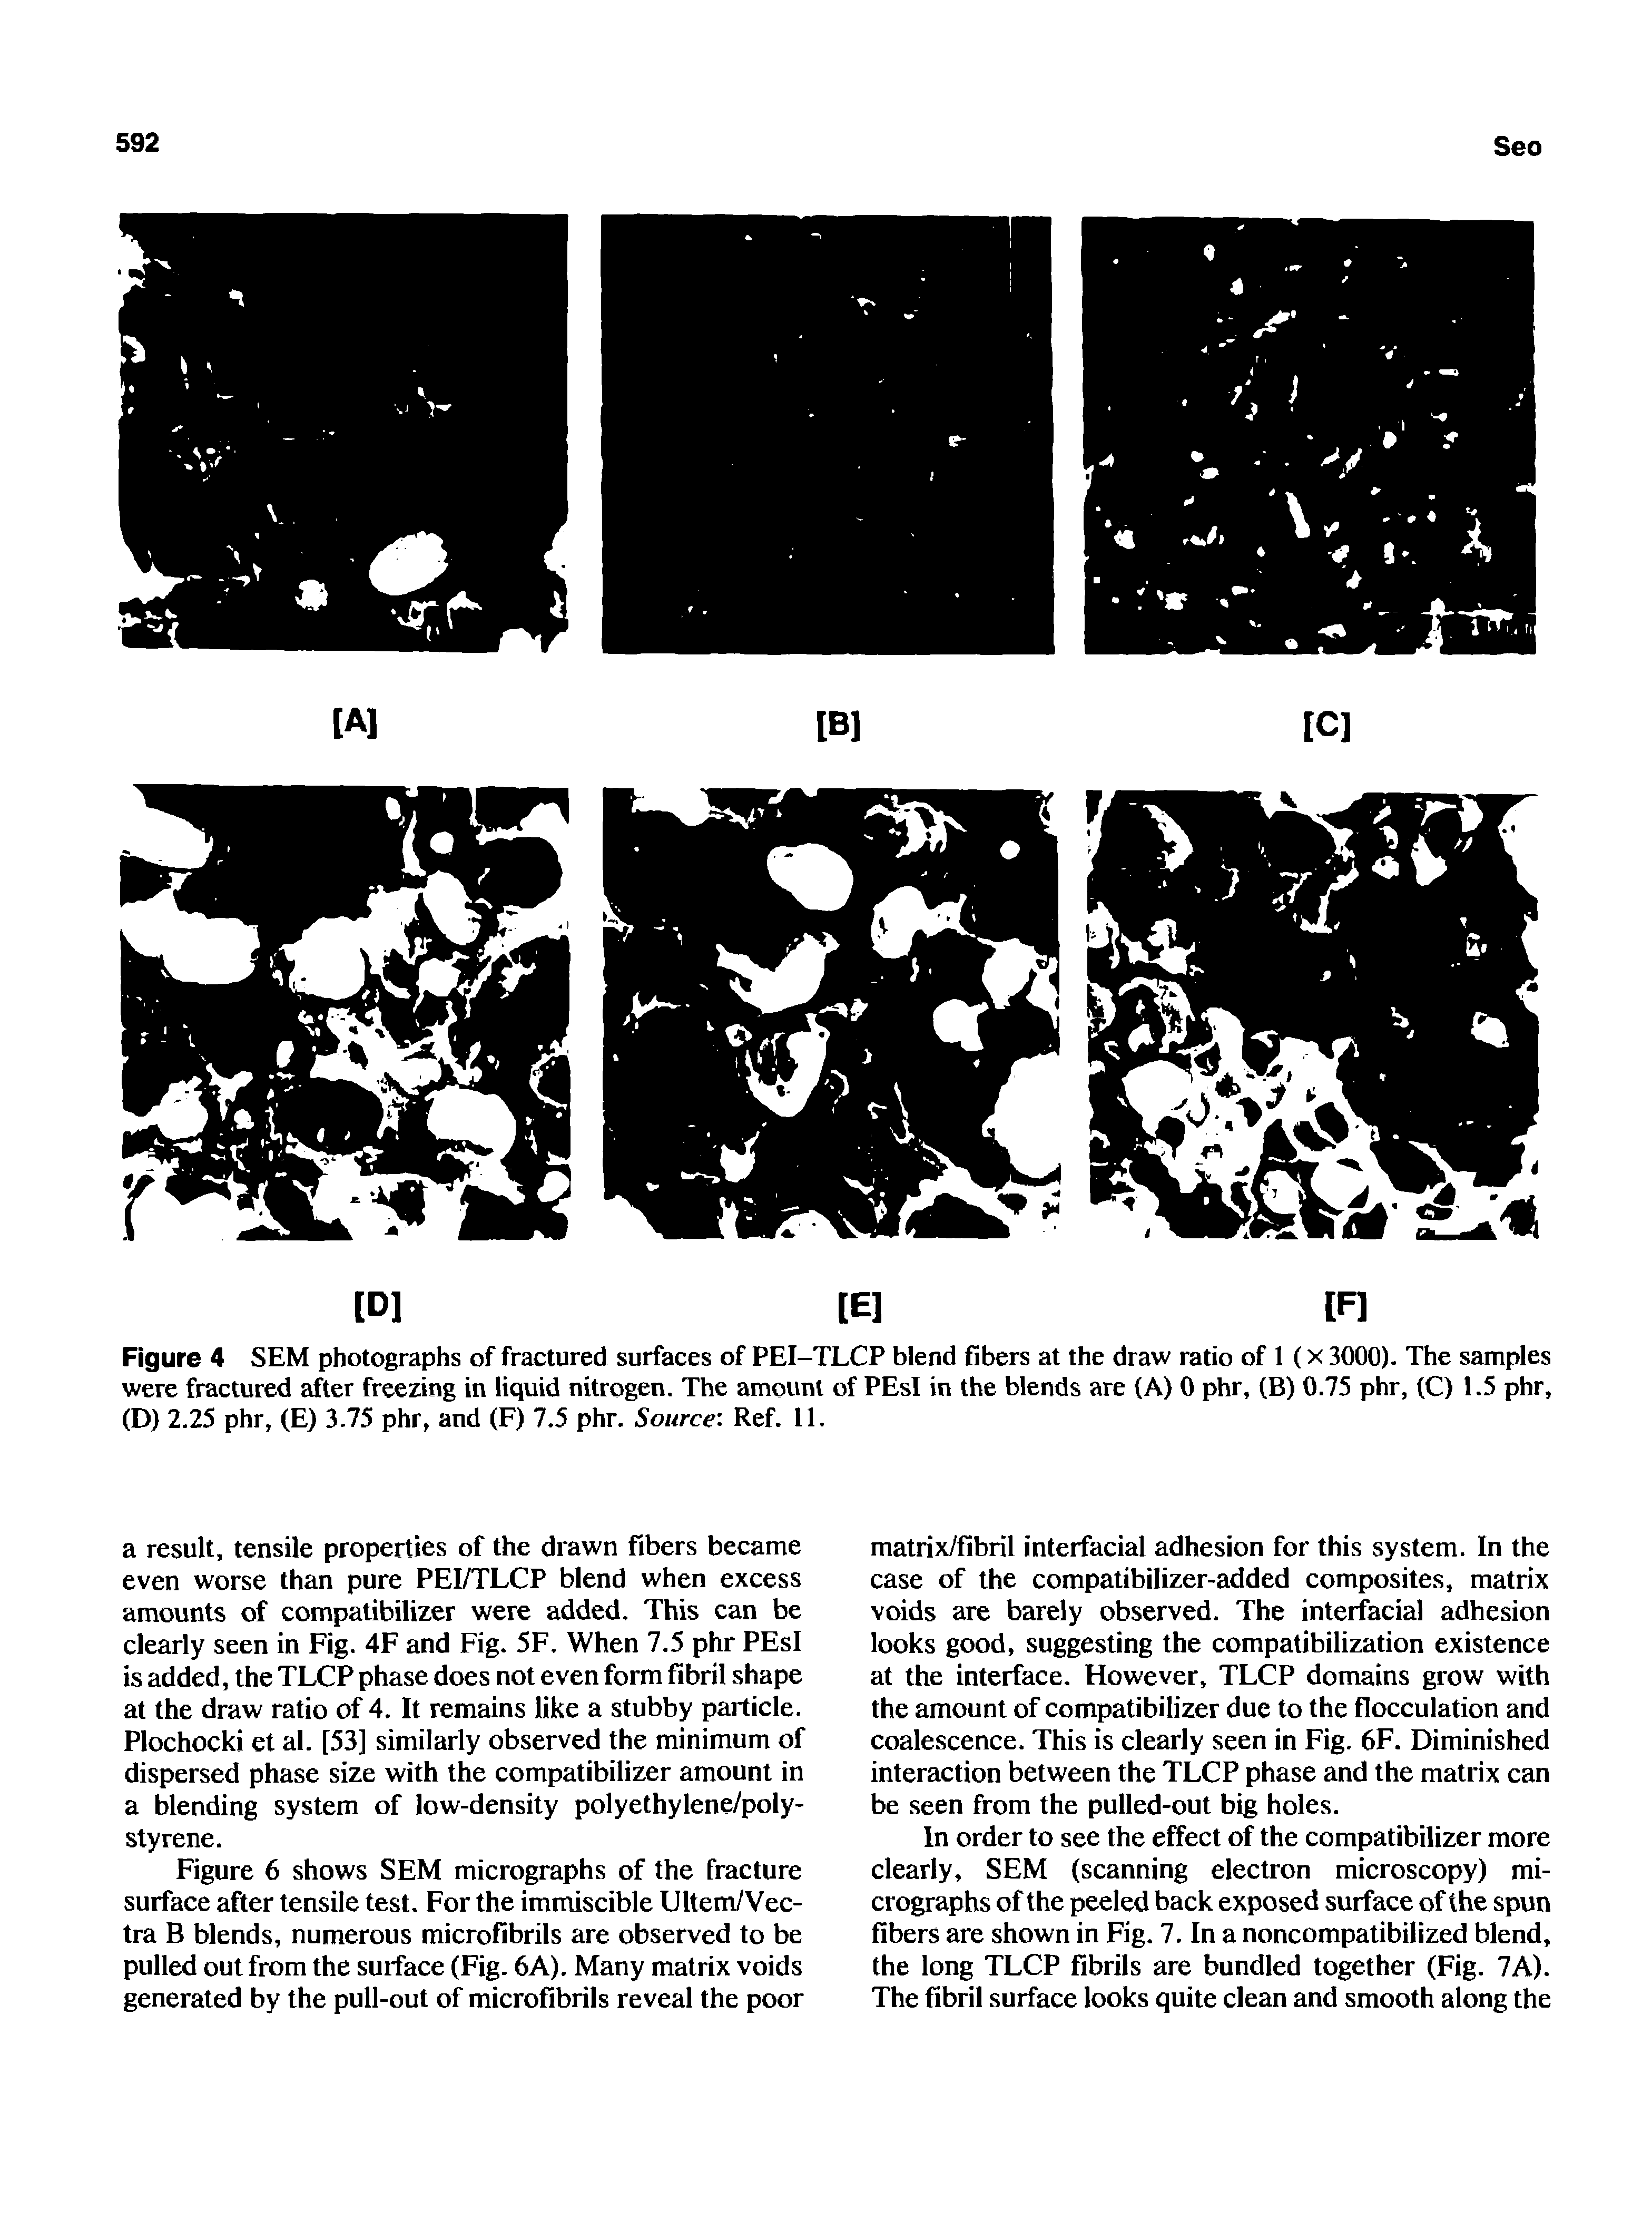 Figure 6 shows SEM micrographs of the fracture surface after tensile test. For the immiscible Ultem/Vec-tra B blends, numerous microfibrils are observed to be pulled out from the surface (Fig. 6A), Many matrix voids generated by the pull-out of microfibrils reveal the poor...